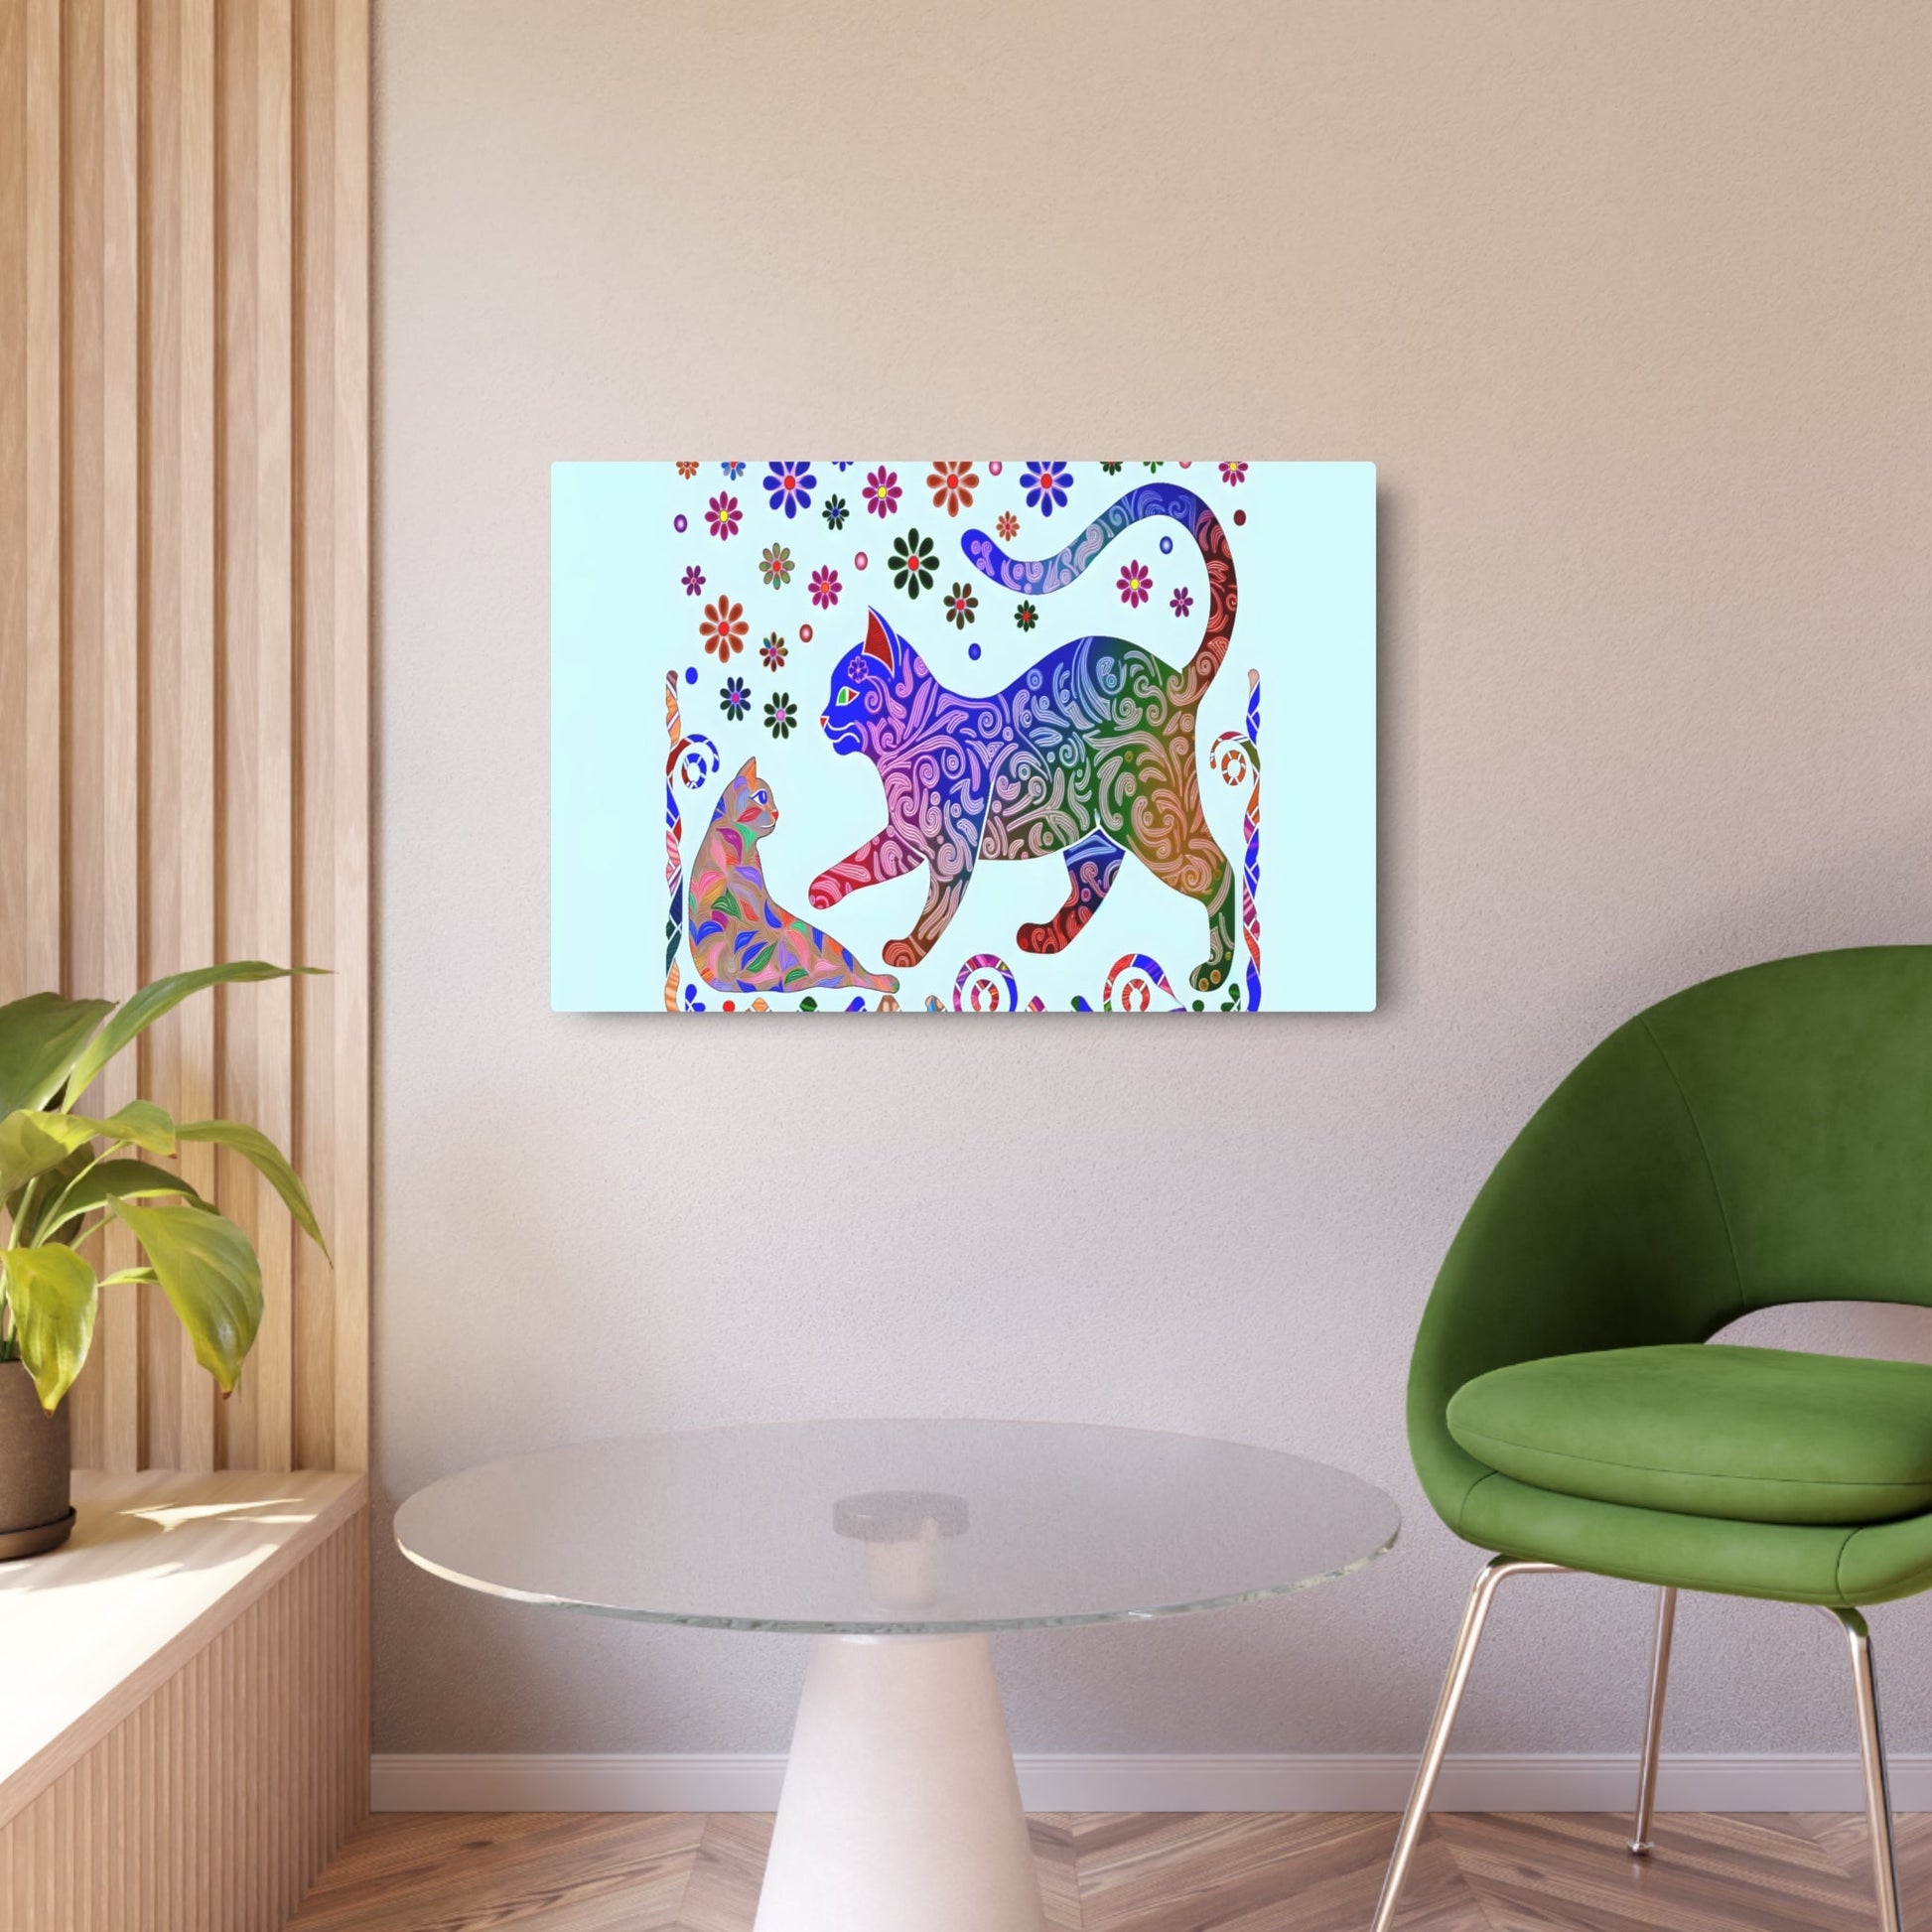 Metal Poster Art | "Indonesian Batik-Style Artwork with Vibrant Colors and Intricate Patterns Featuring Playful Cat - Non-Western & Global Styles Art - Metal Poster Art 36″ x 24″ (Horizontal) 0.12''